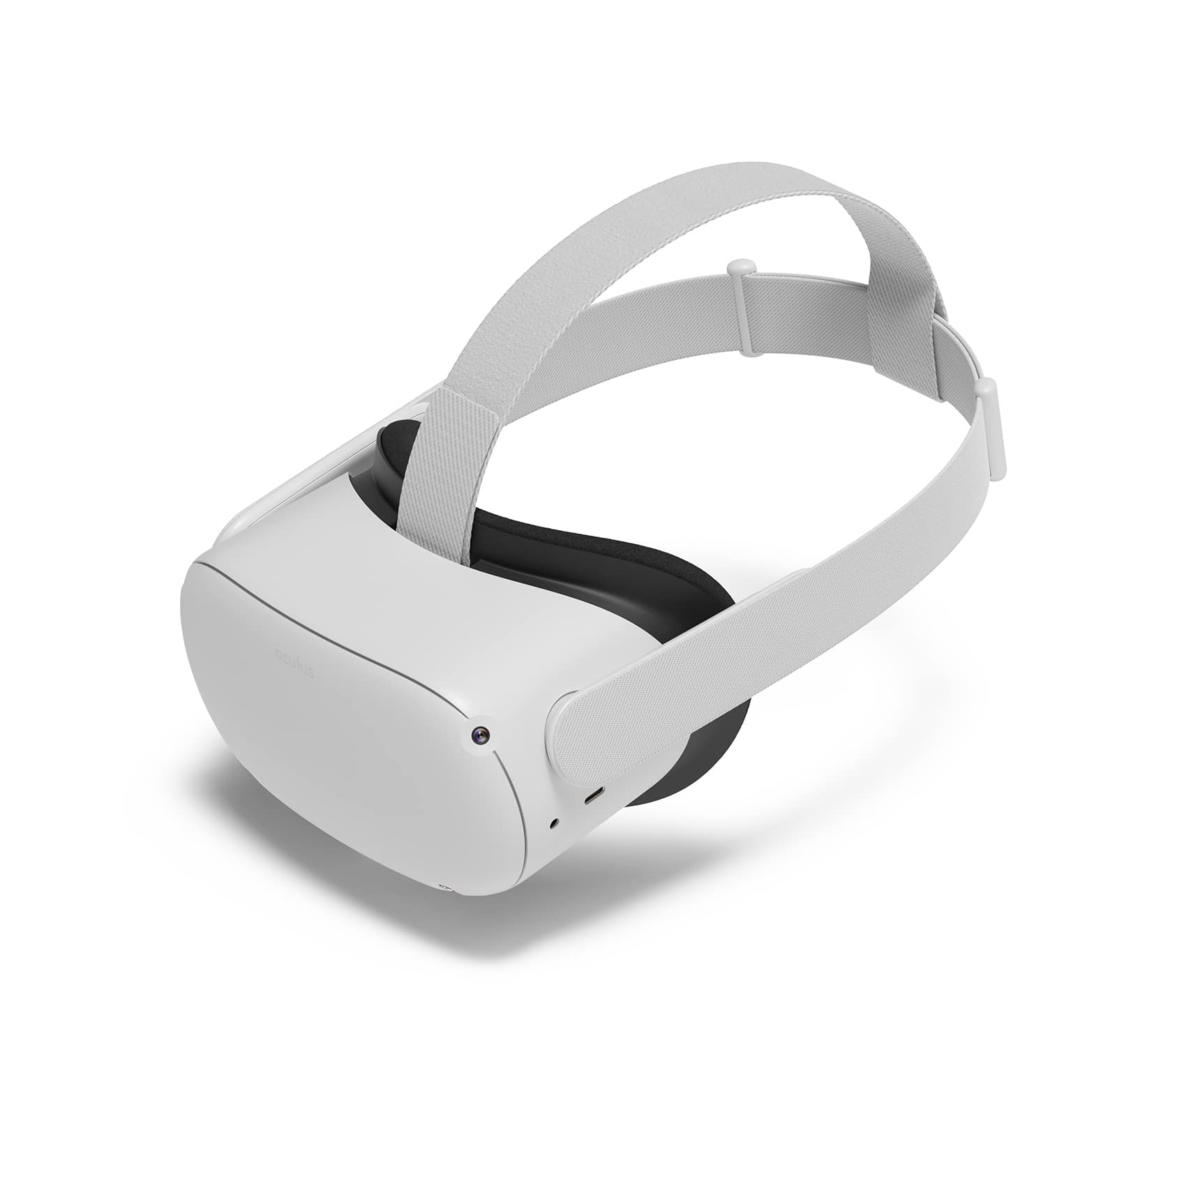 Meta Quest 2- Advanced All-In-One Virtual Reality Headset - 256 GB